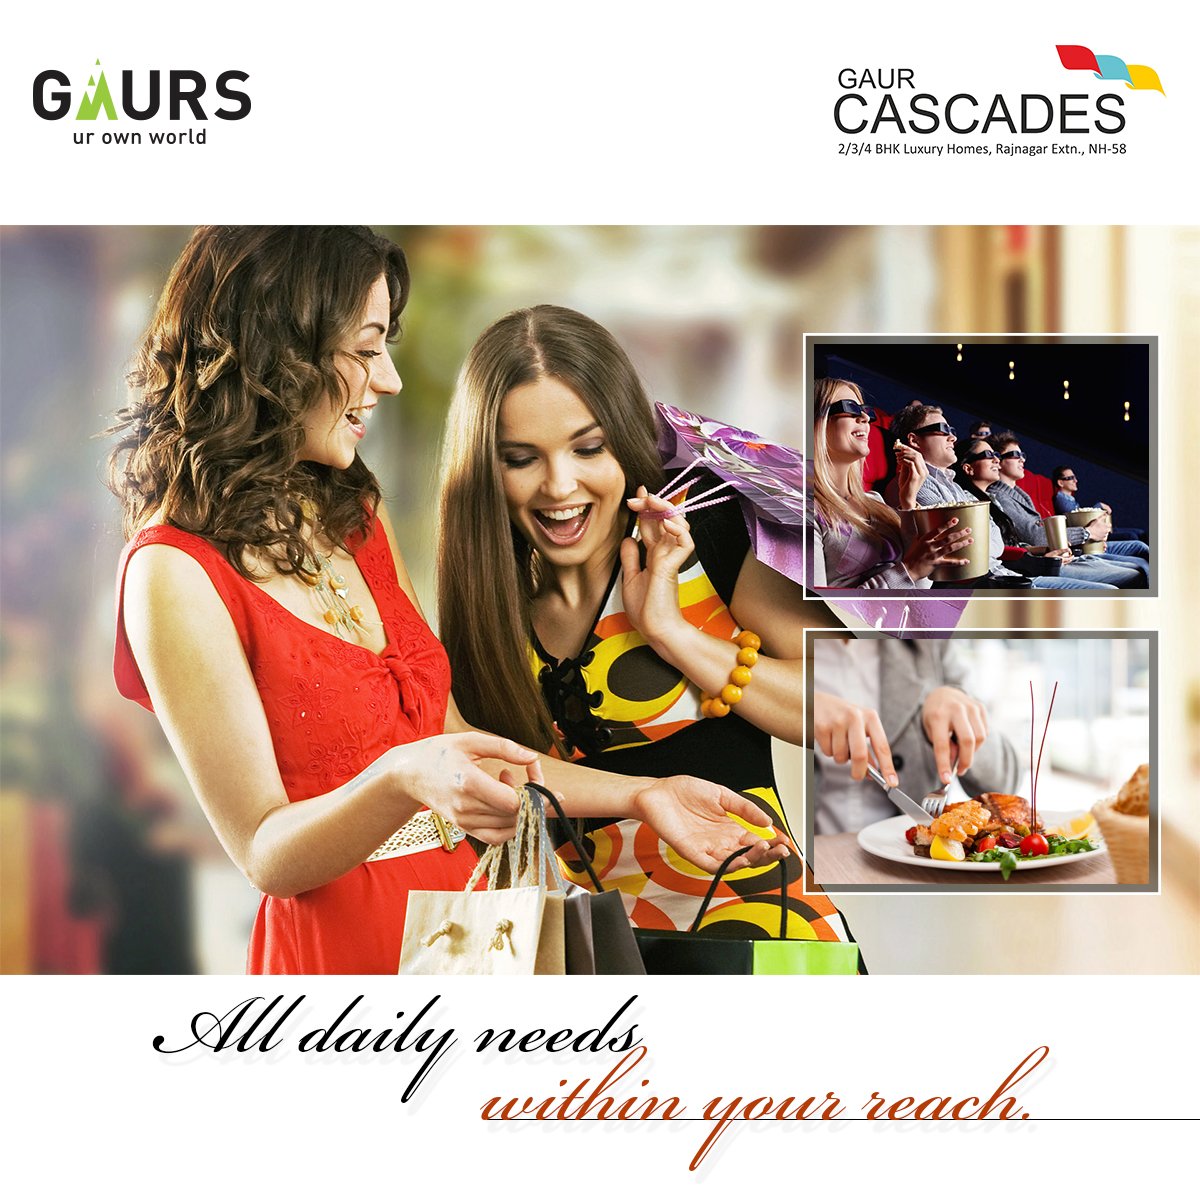 All daily needs fulfilled at Gaur Cascades Update